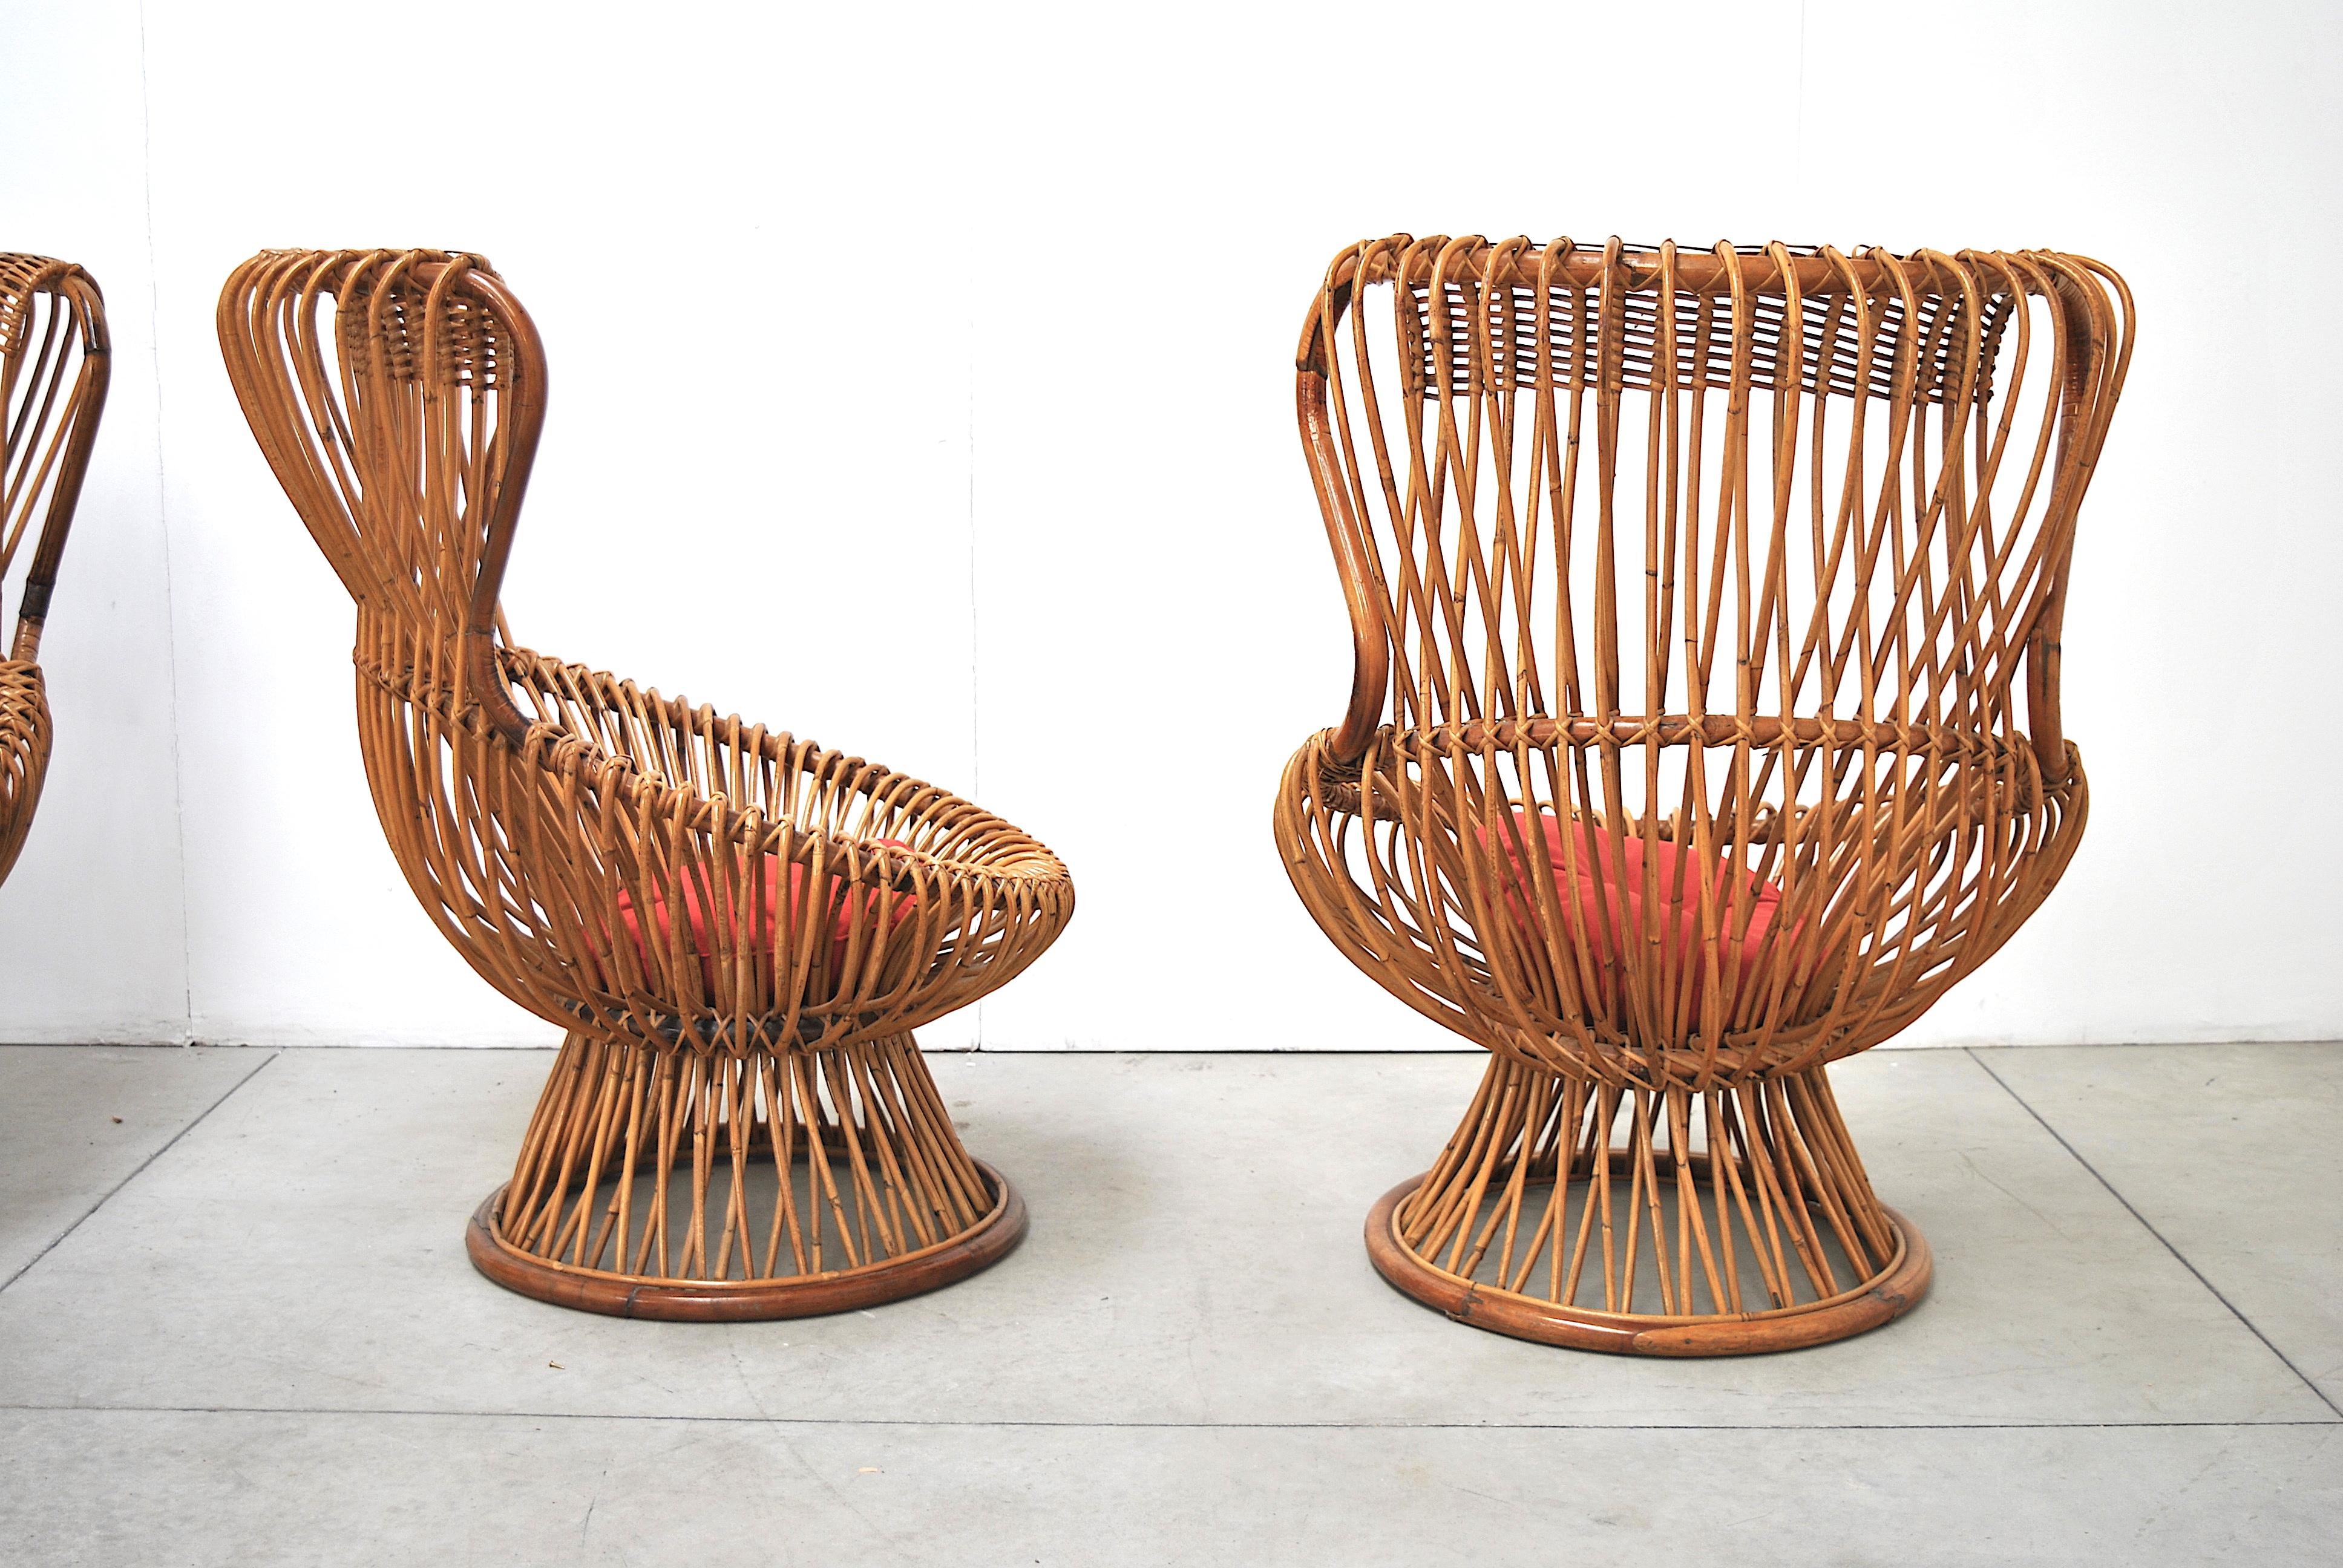 Just after the war, Albini began to work with simple and low-cost materials such as wicker. Margherita is the first armchair without legs of Italian design. It is made with a structure consisting of 60 reeds of Indian rush and 4 crossbows in